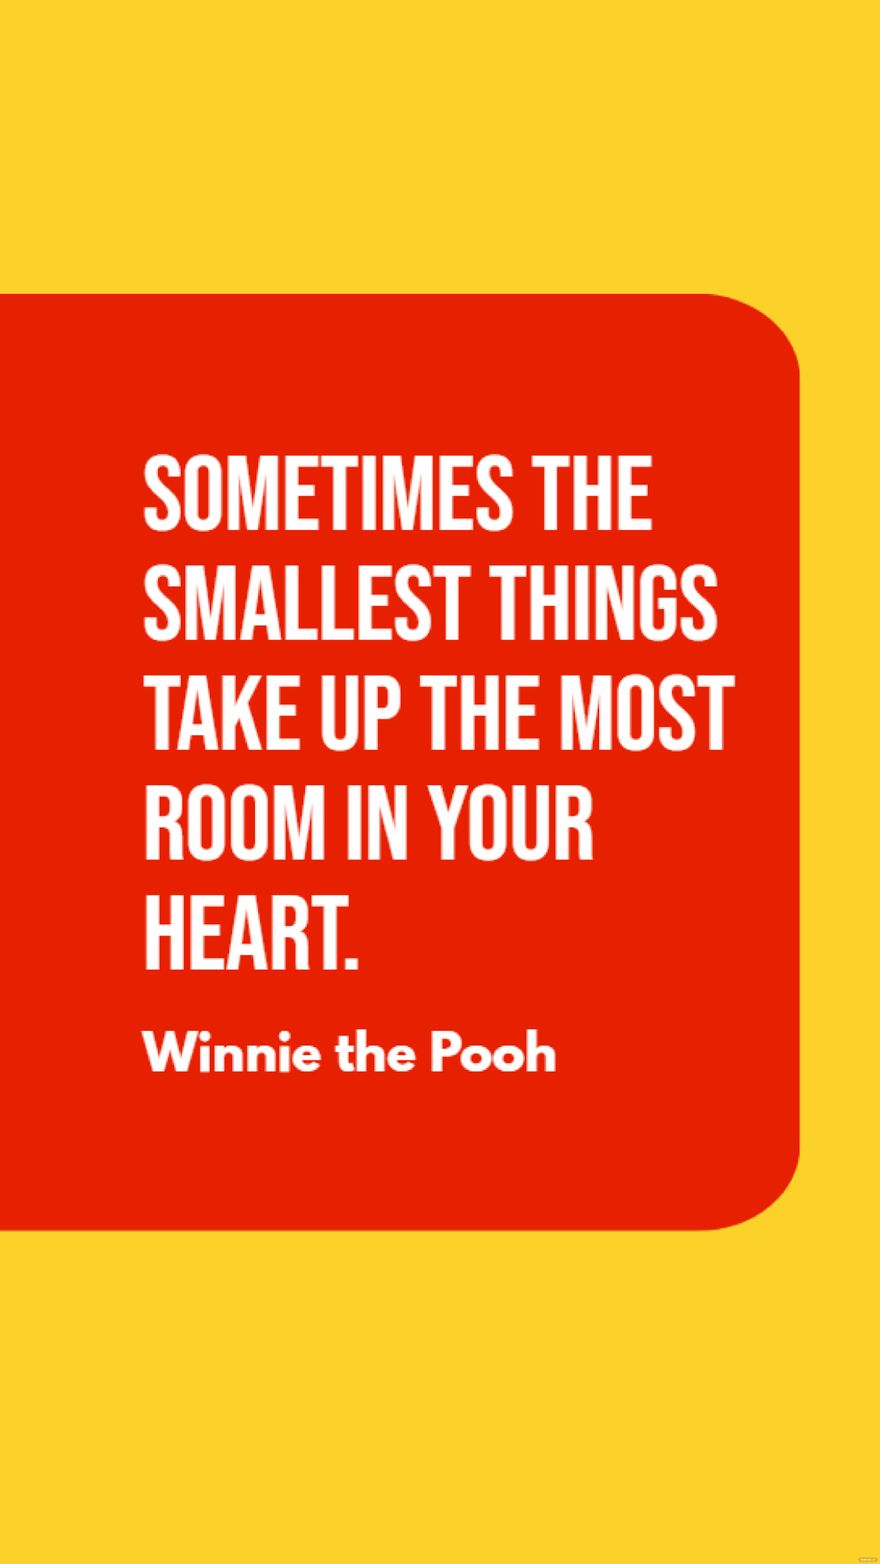 Winnie the Pooh - Sometimes the smallest things take up the most room in your heart.